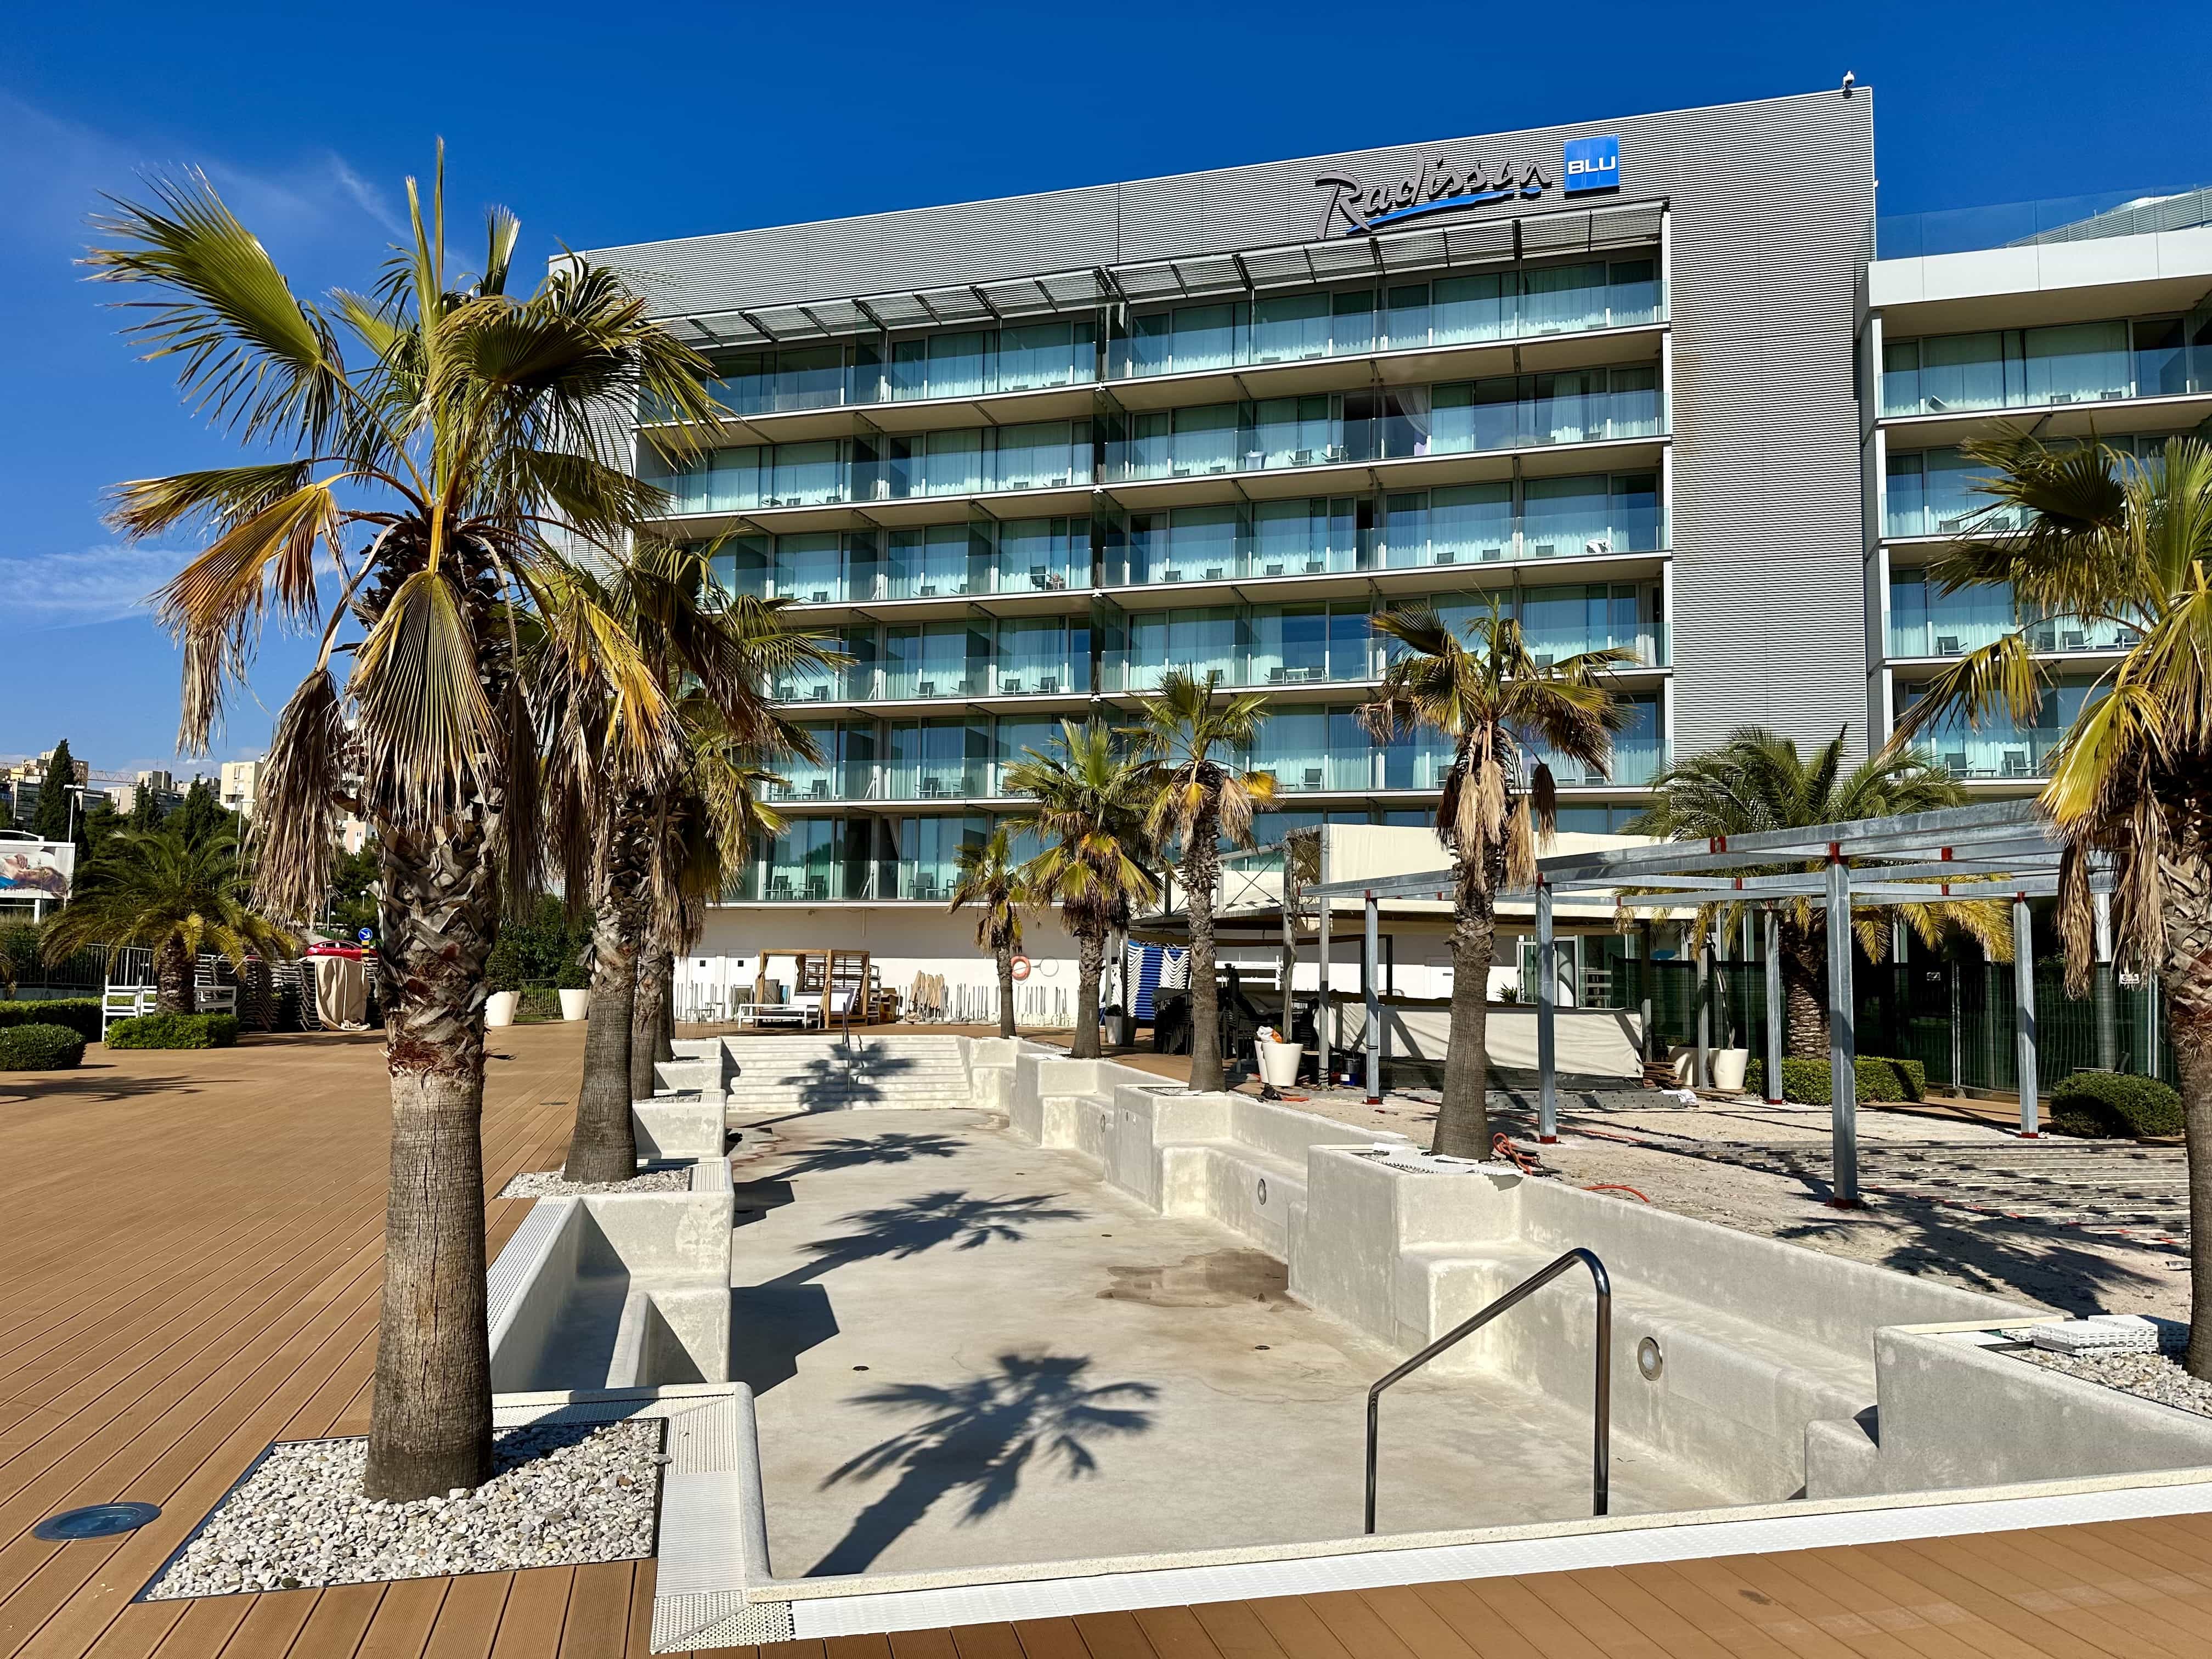 An exterior view of the Radisson Blu, Split hotel, with an empty pool in the foreground